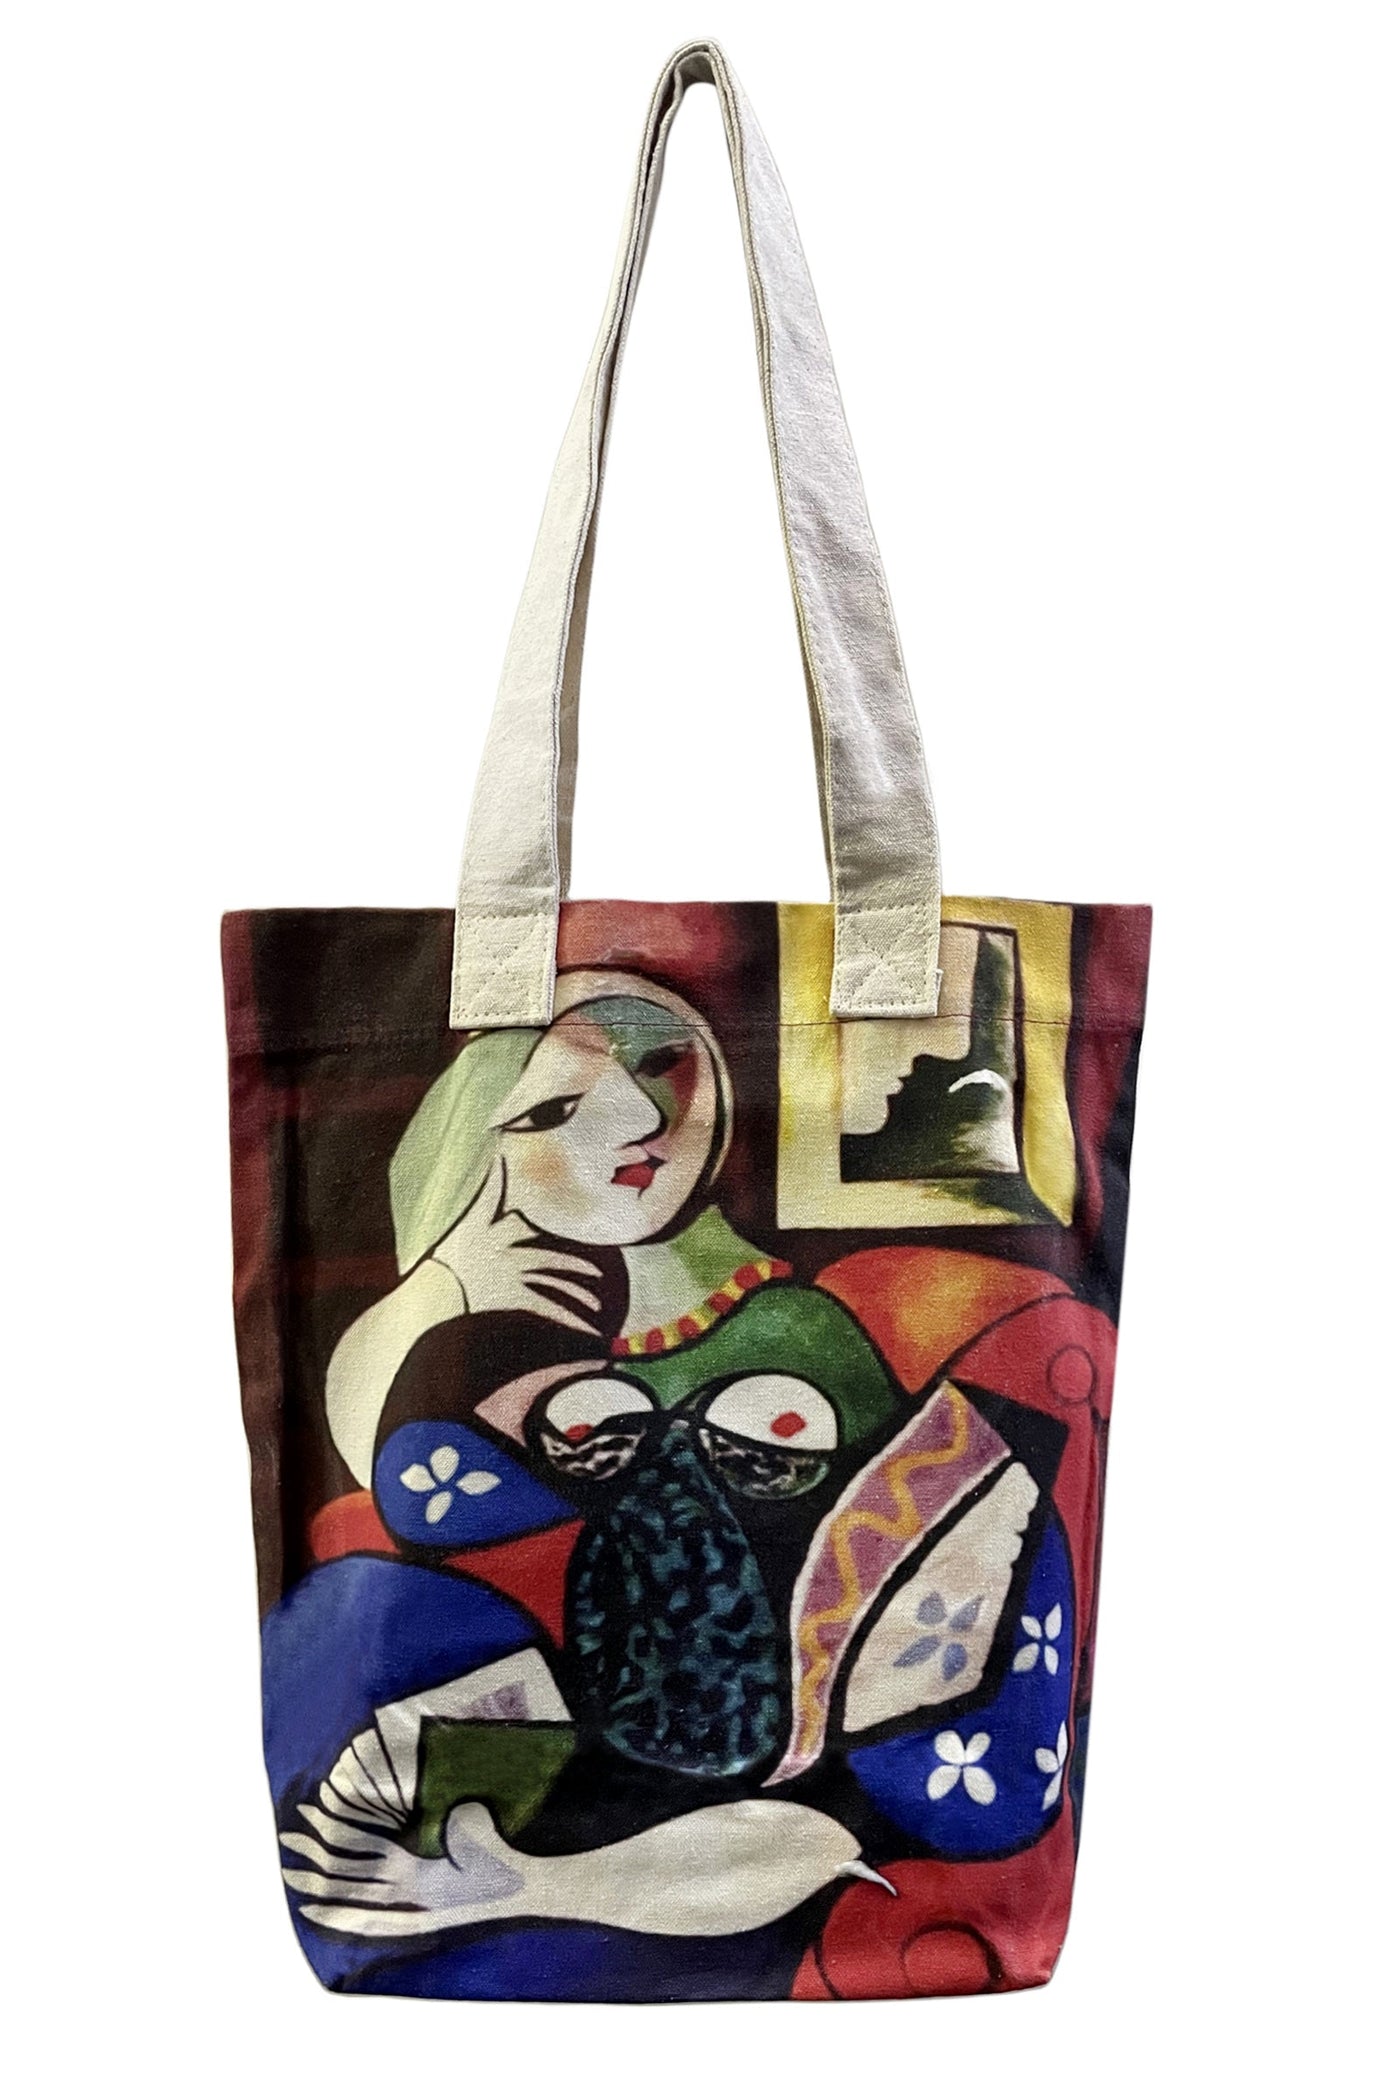 Picasso Woman with Book Art Print Cotton Tote Bag